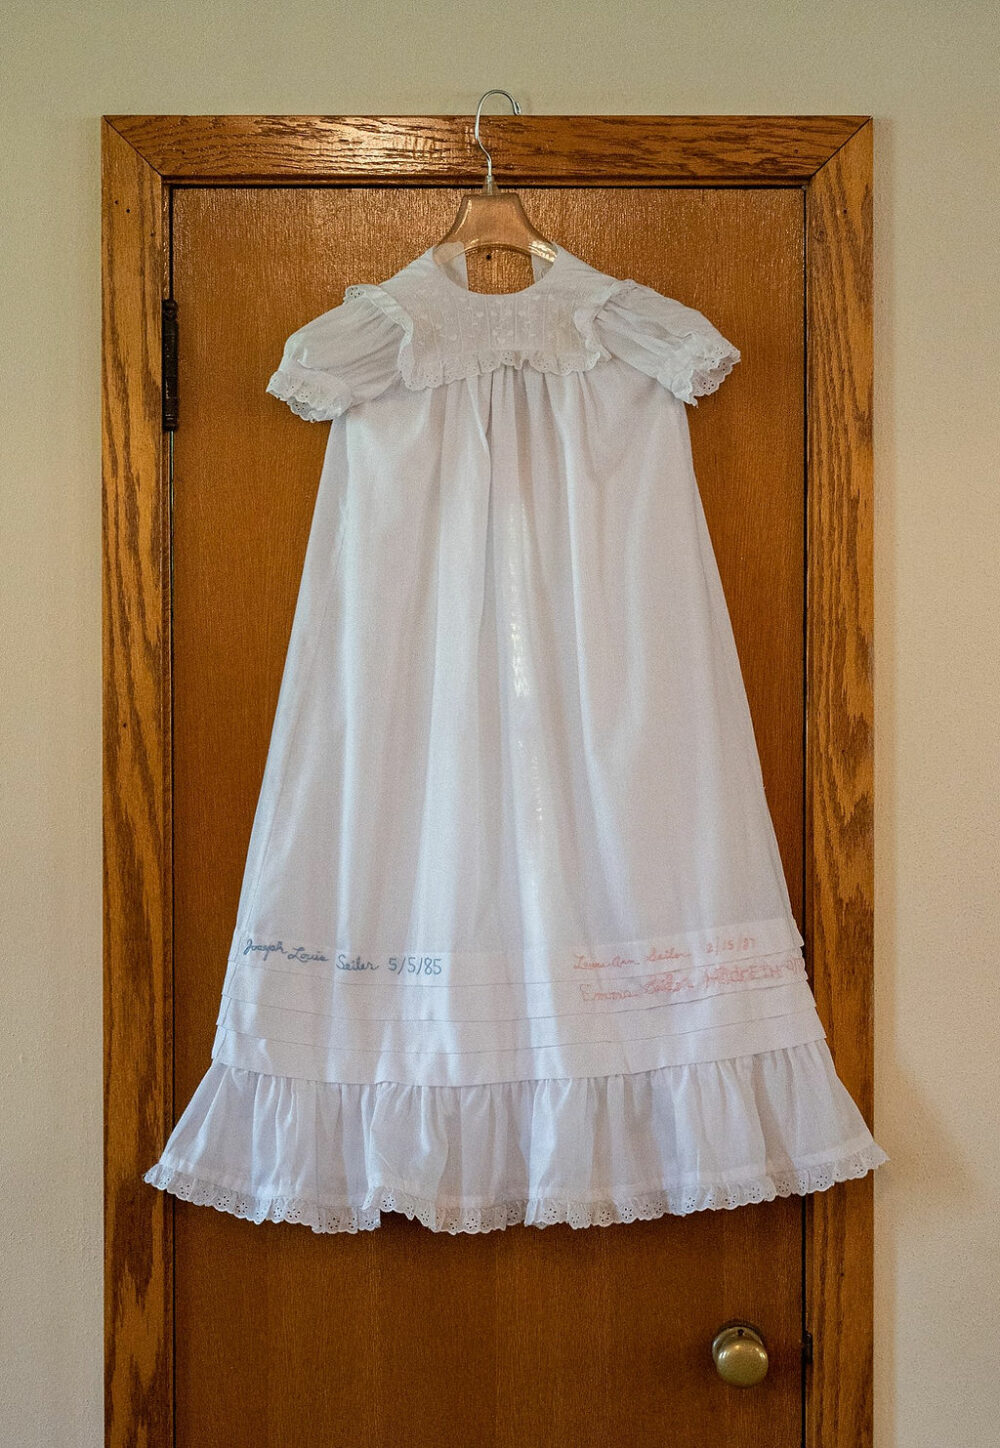 Baptism dress hanging and displayed on door inside church for a baby baptism and family session in Mount Laurel, NJ.